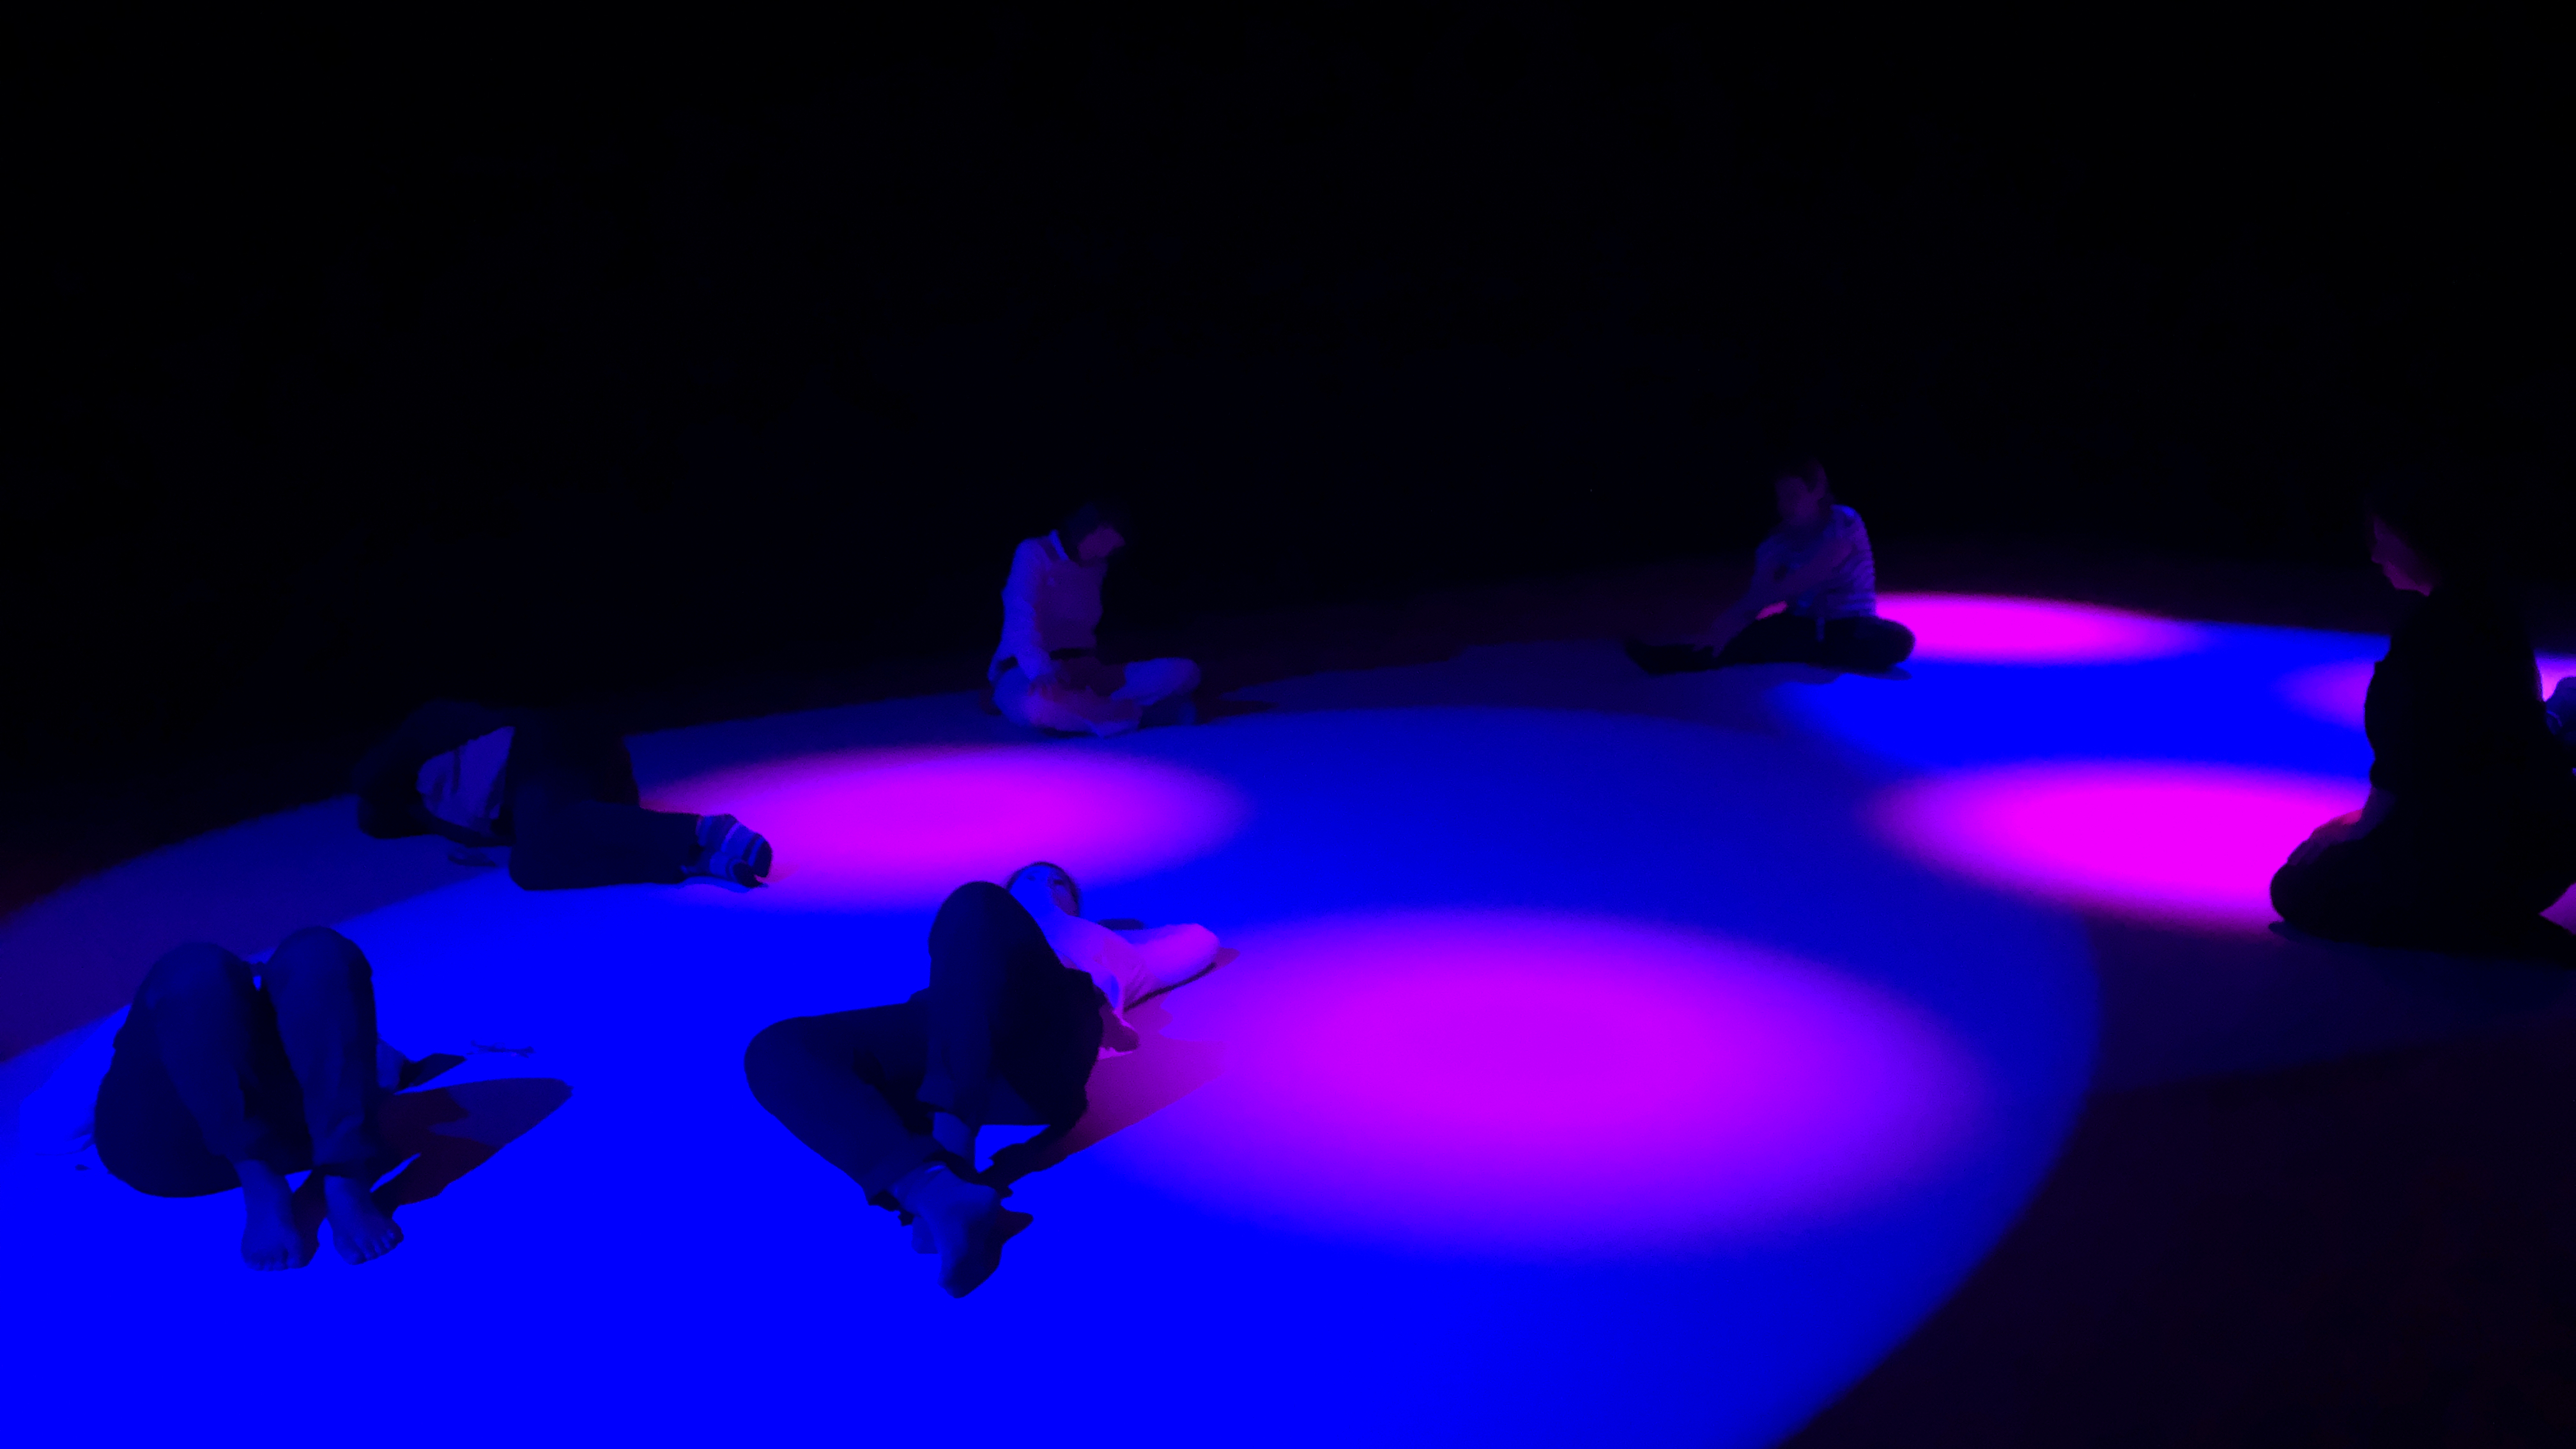 Stillness lab participants lie on the ground immersed in violet light with fuchsia spot lights. 